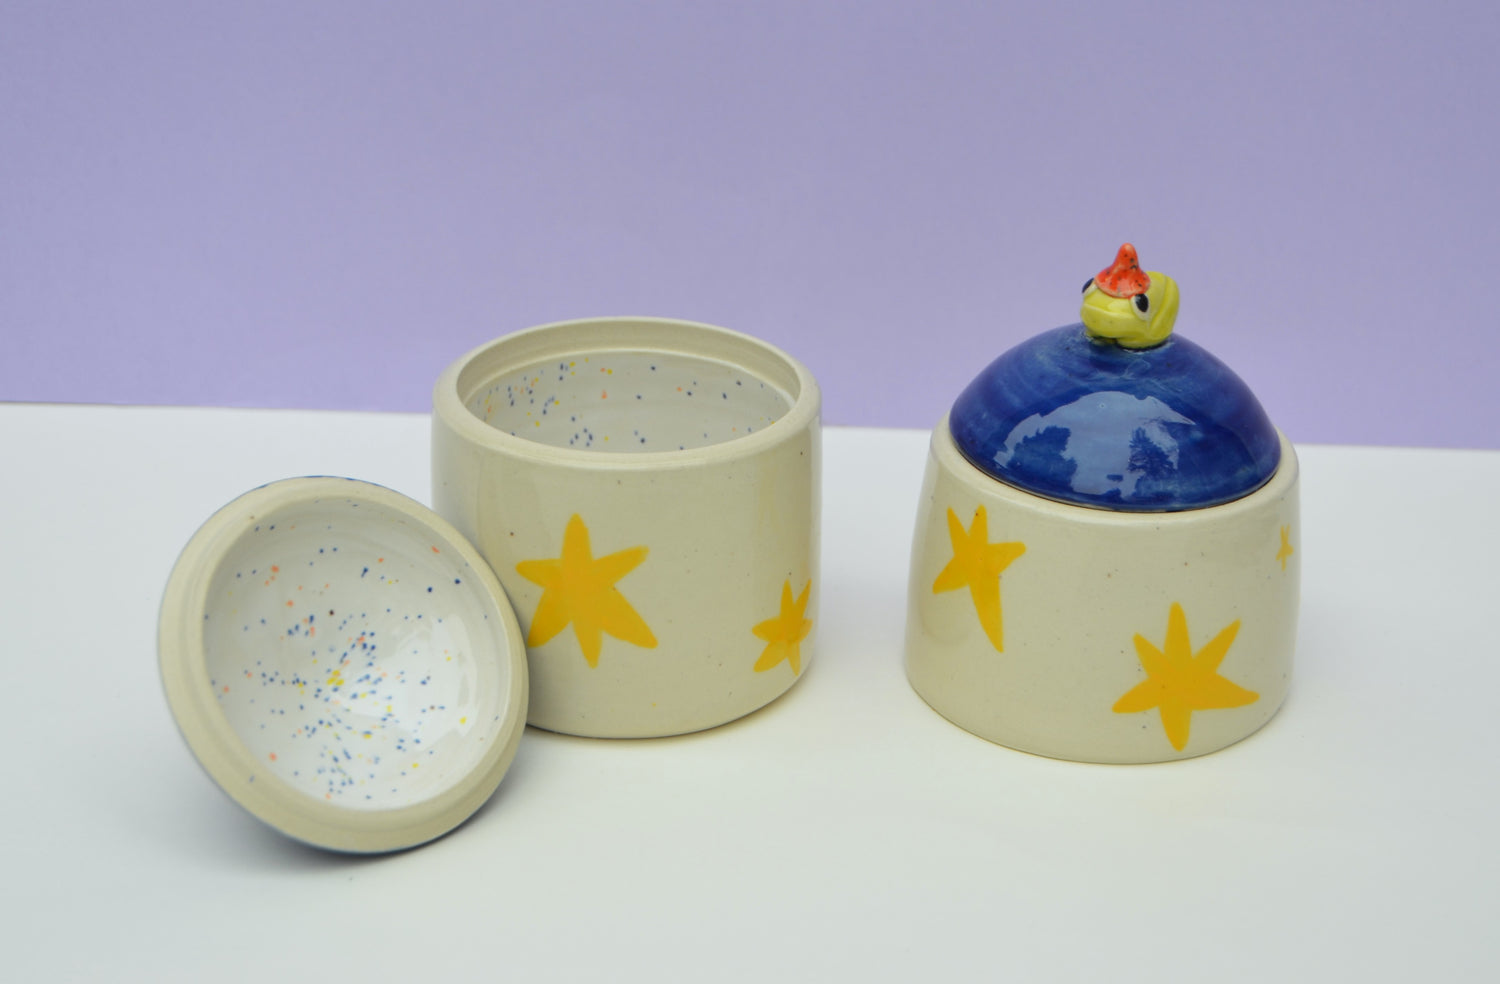 two ceramic jars, jar on the left is open showing off its speckled white interior. The jar on the right is lidded with a dark blue lid that features a small ceramic frog wearing a wizard hat. both jars have bright yellow stars decorating the outside